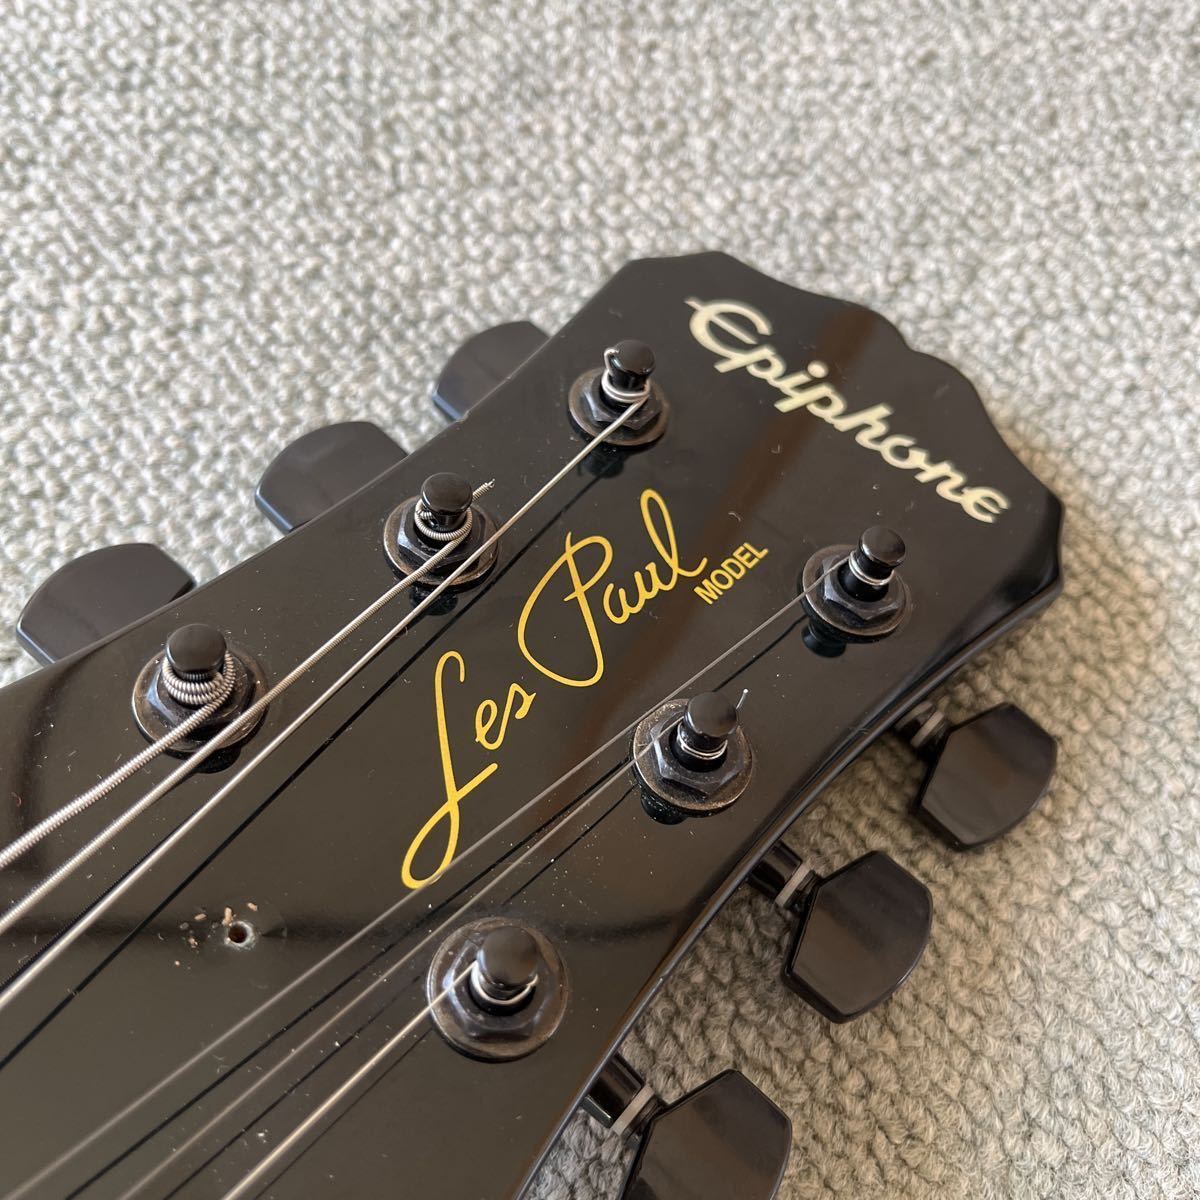 epiphone by Gibson Les Paul standard BLK 黒　エピフォン　ギブソン　レスポール　スタンダード　ジャンク　lespaul エレキギター_画像3